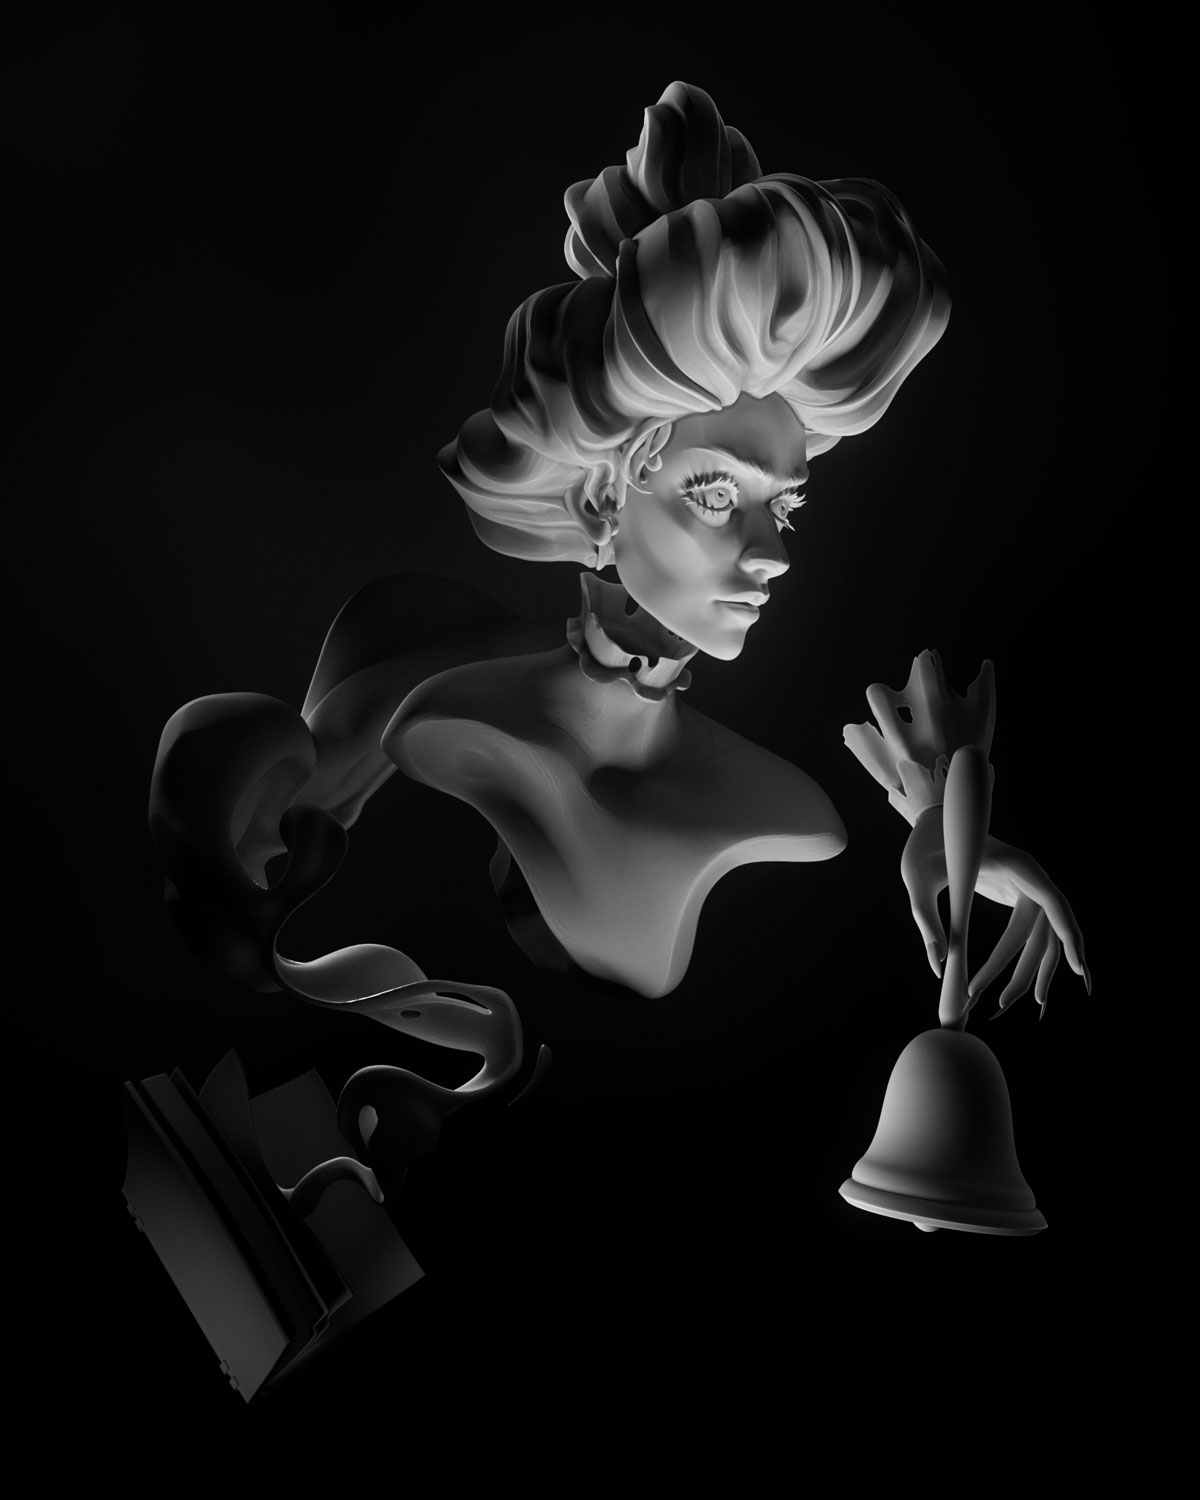 3D sculpture of the ghost of an Edwardian-era woman or 